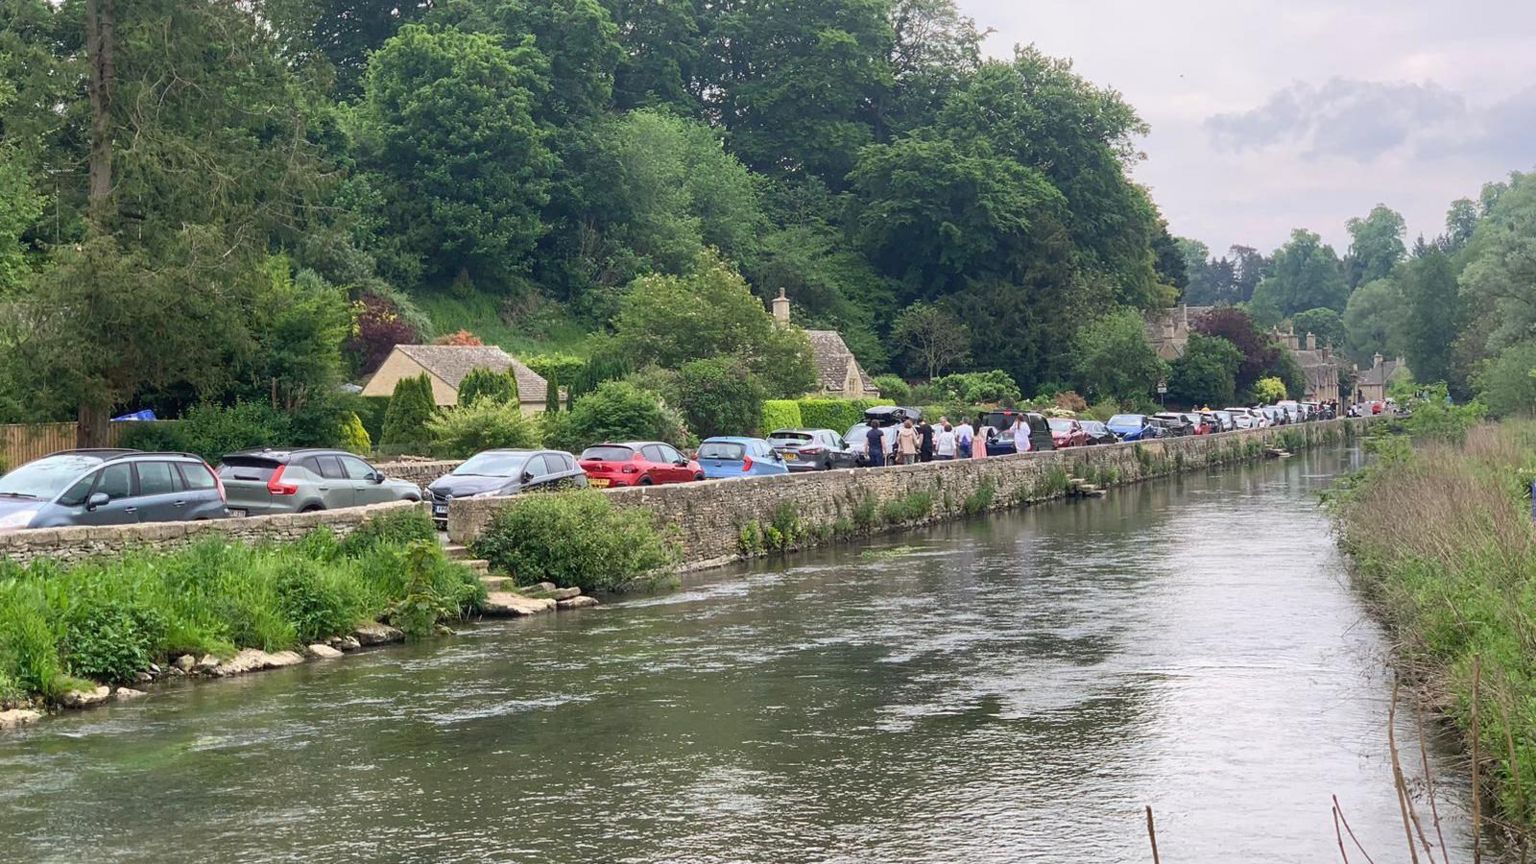 Cars parked in Bibury